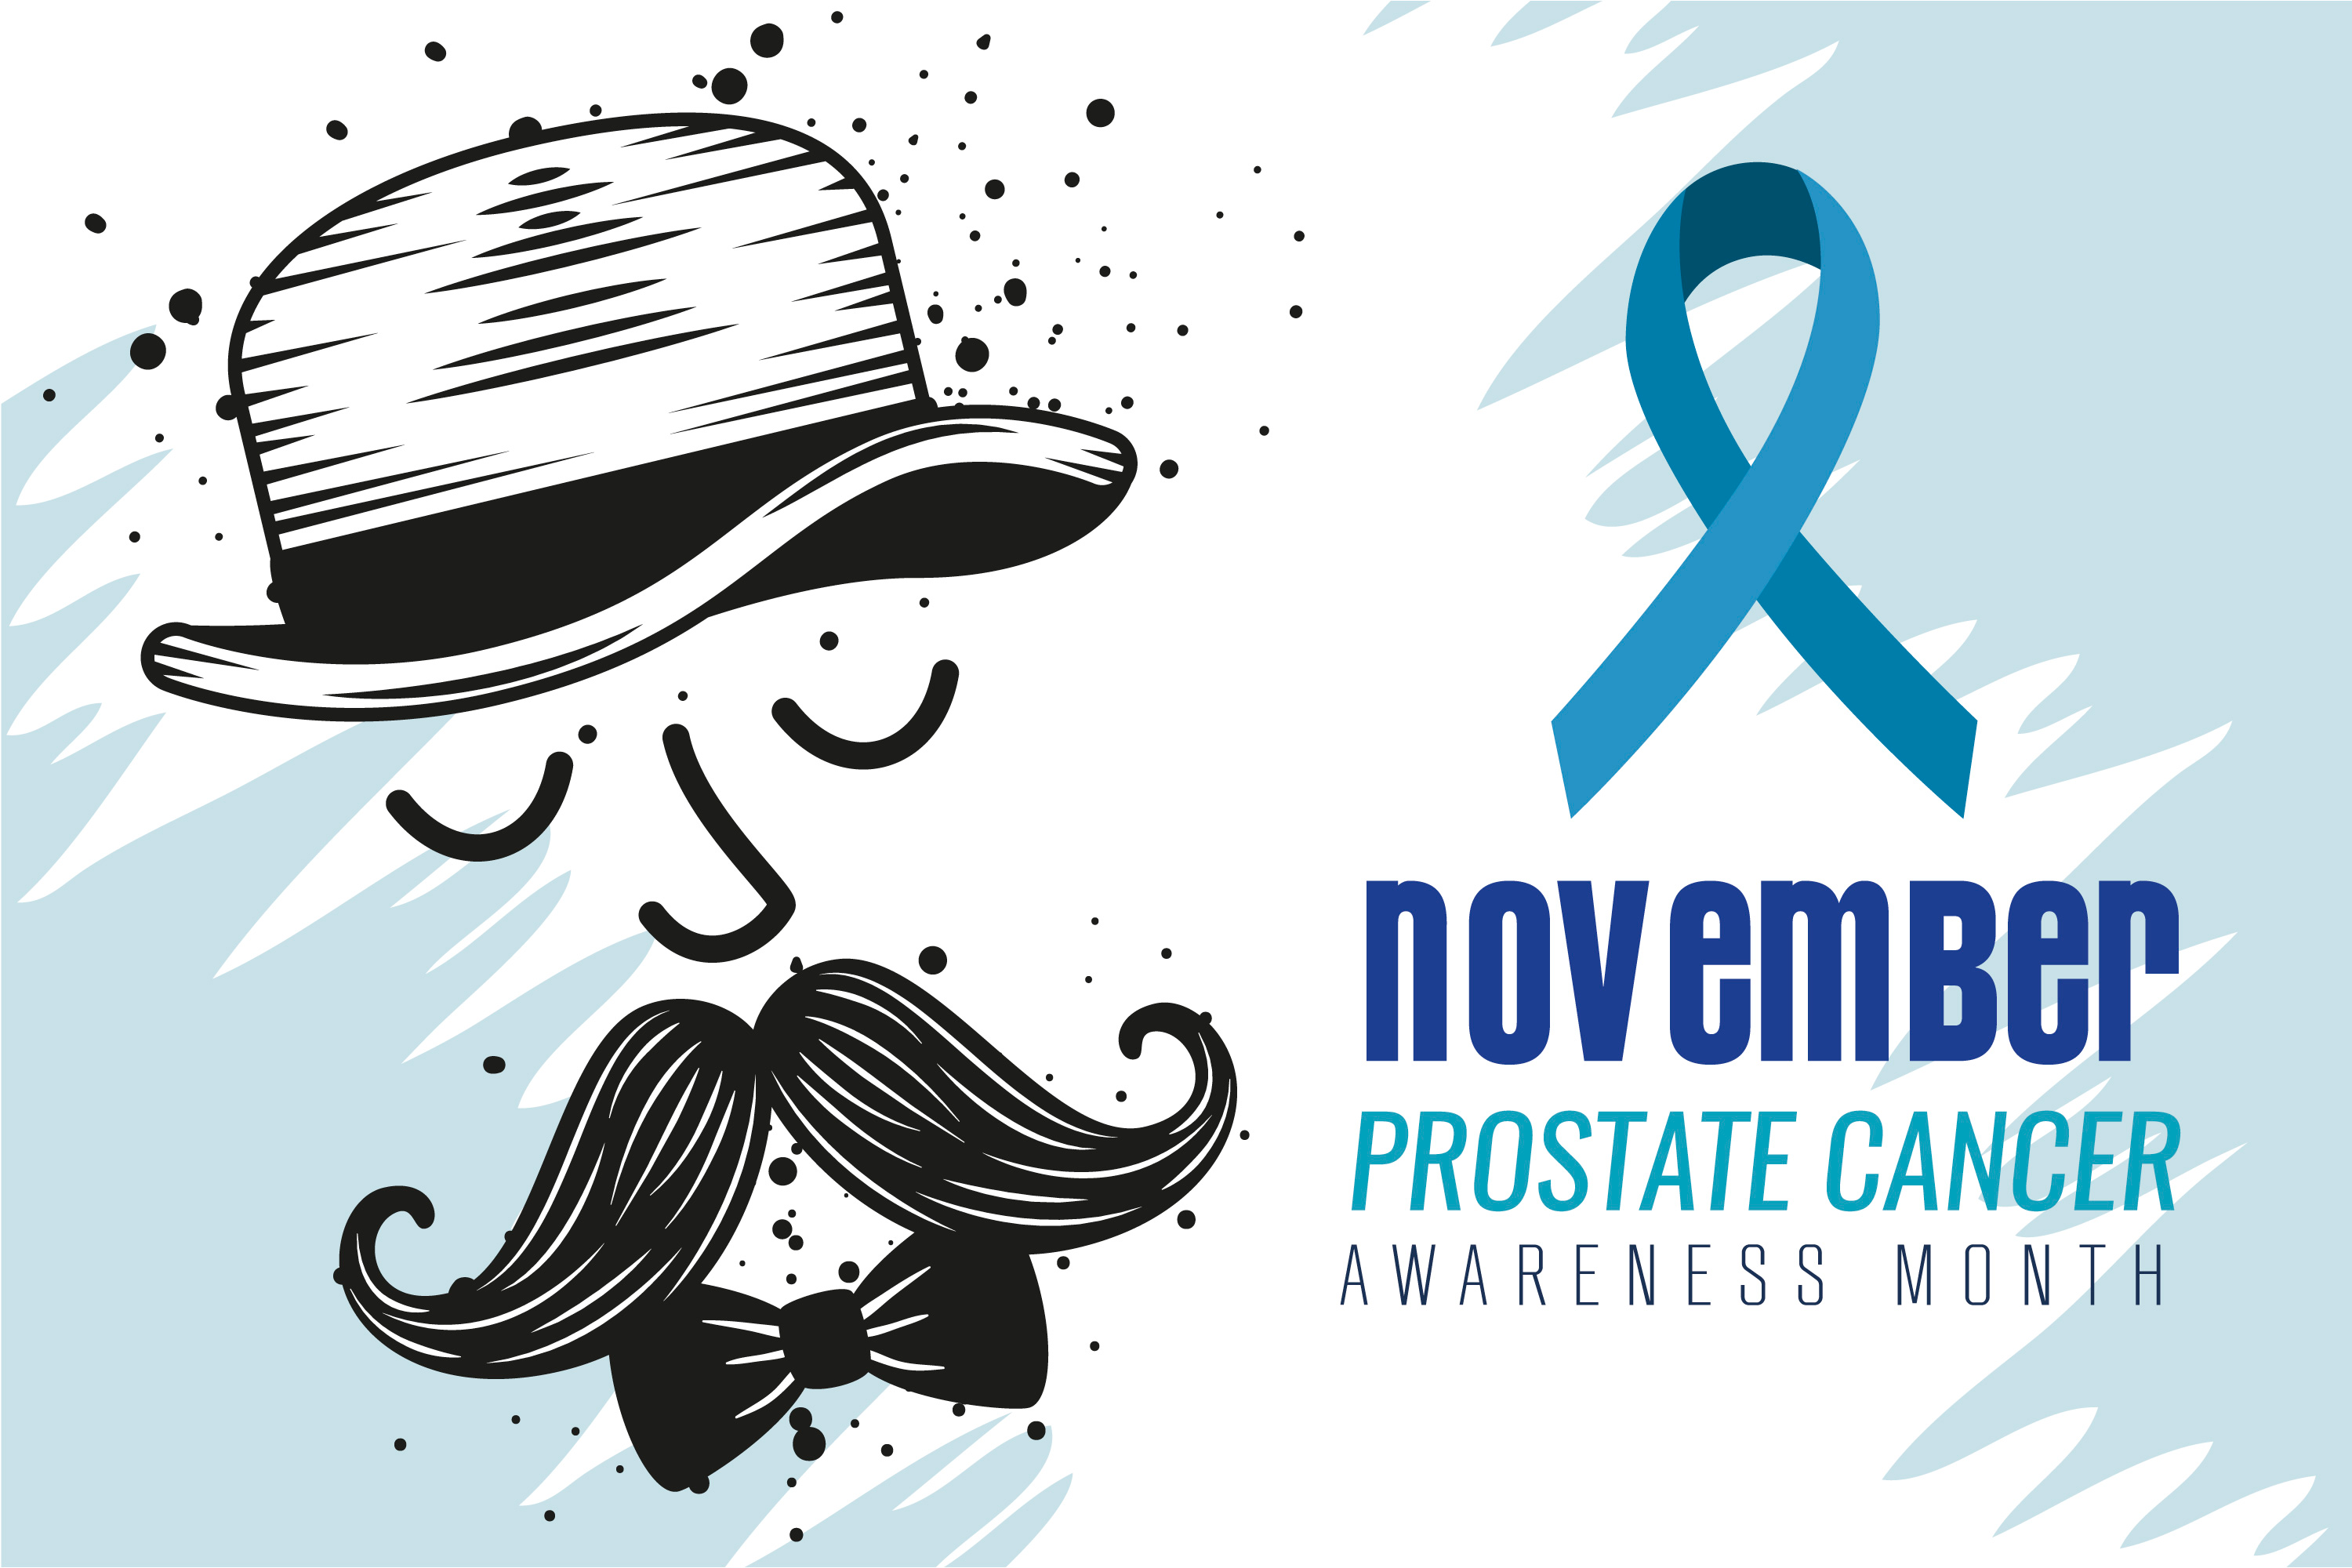 November is celebrated as prostate cancer awareness month.